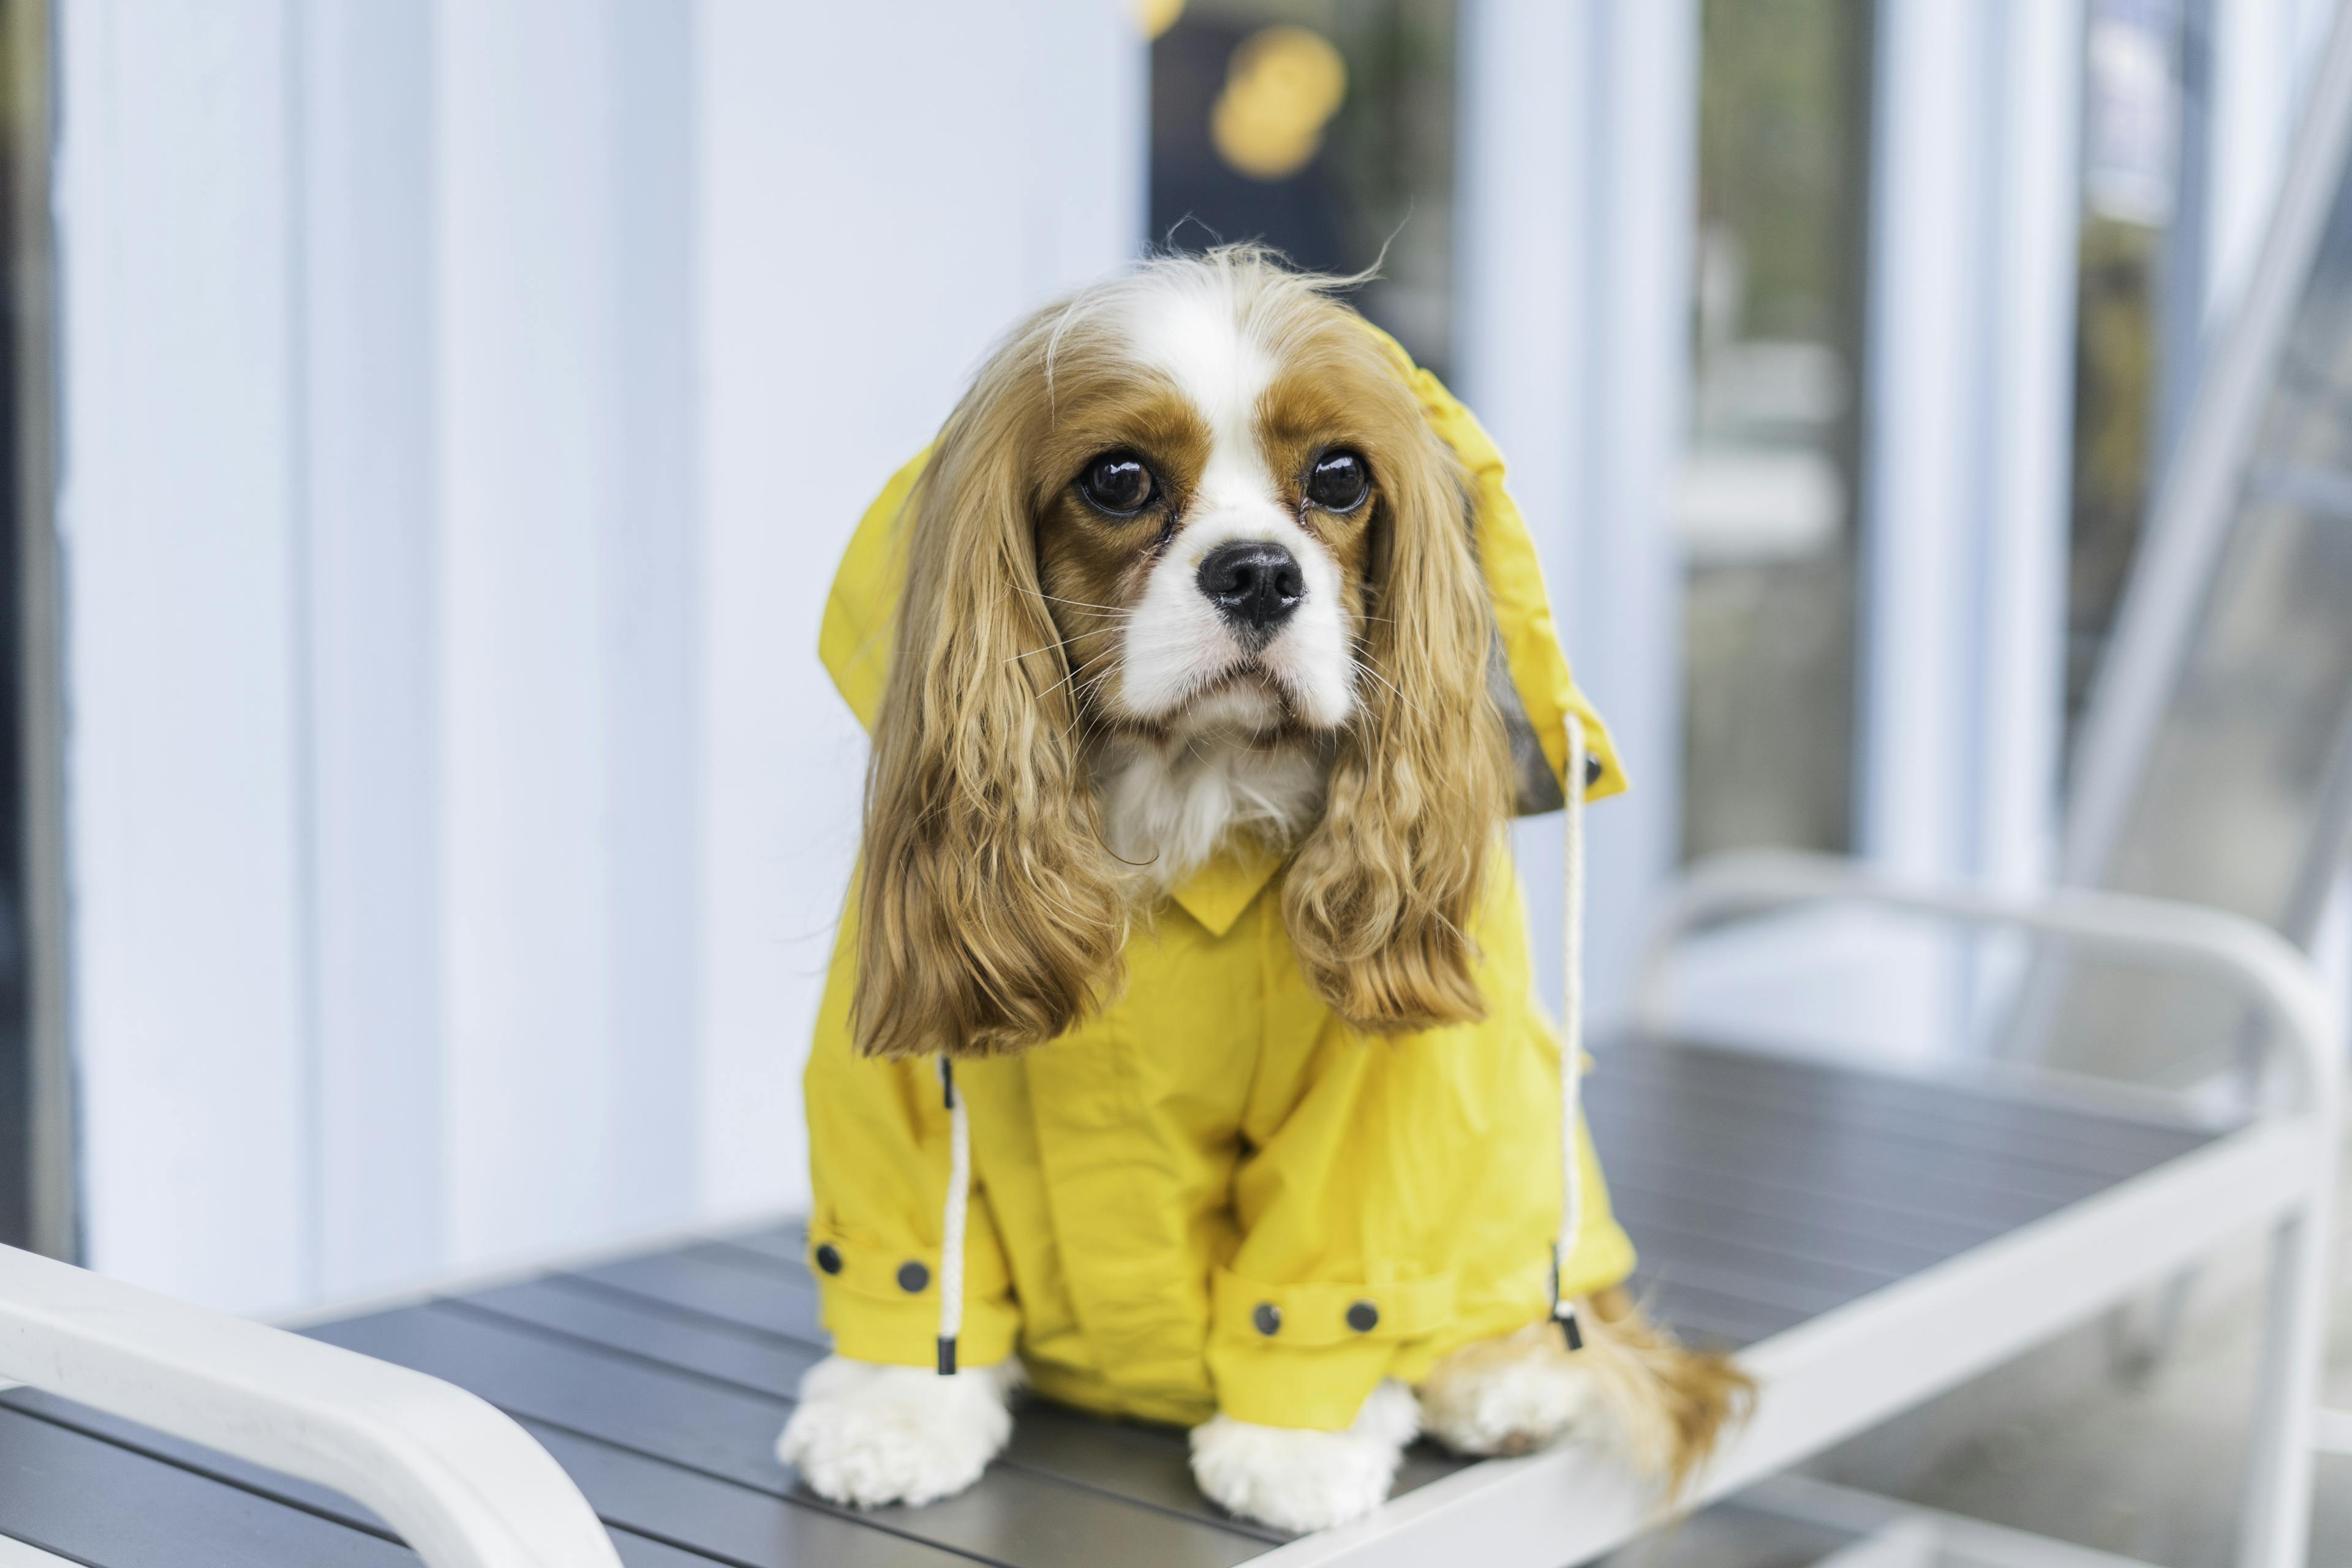 A Cavalier King Charles Spaniel dog wearing a yellow raincoat sitting on a bench.